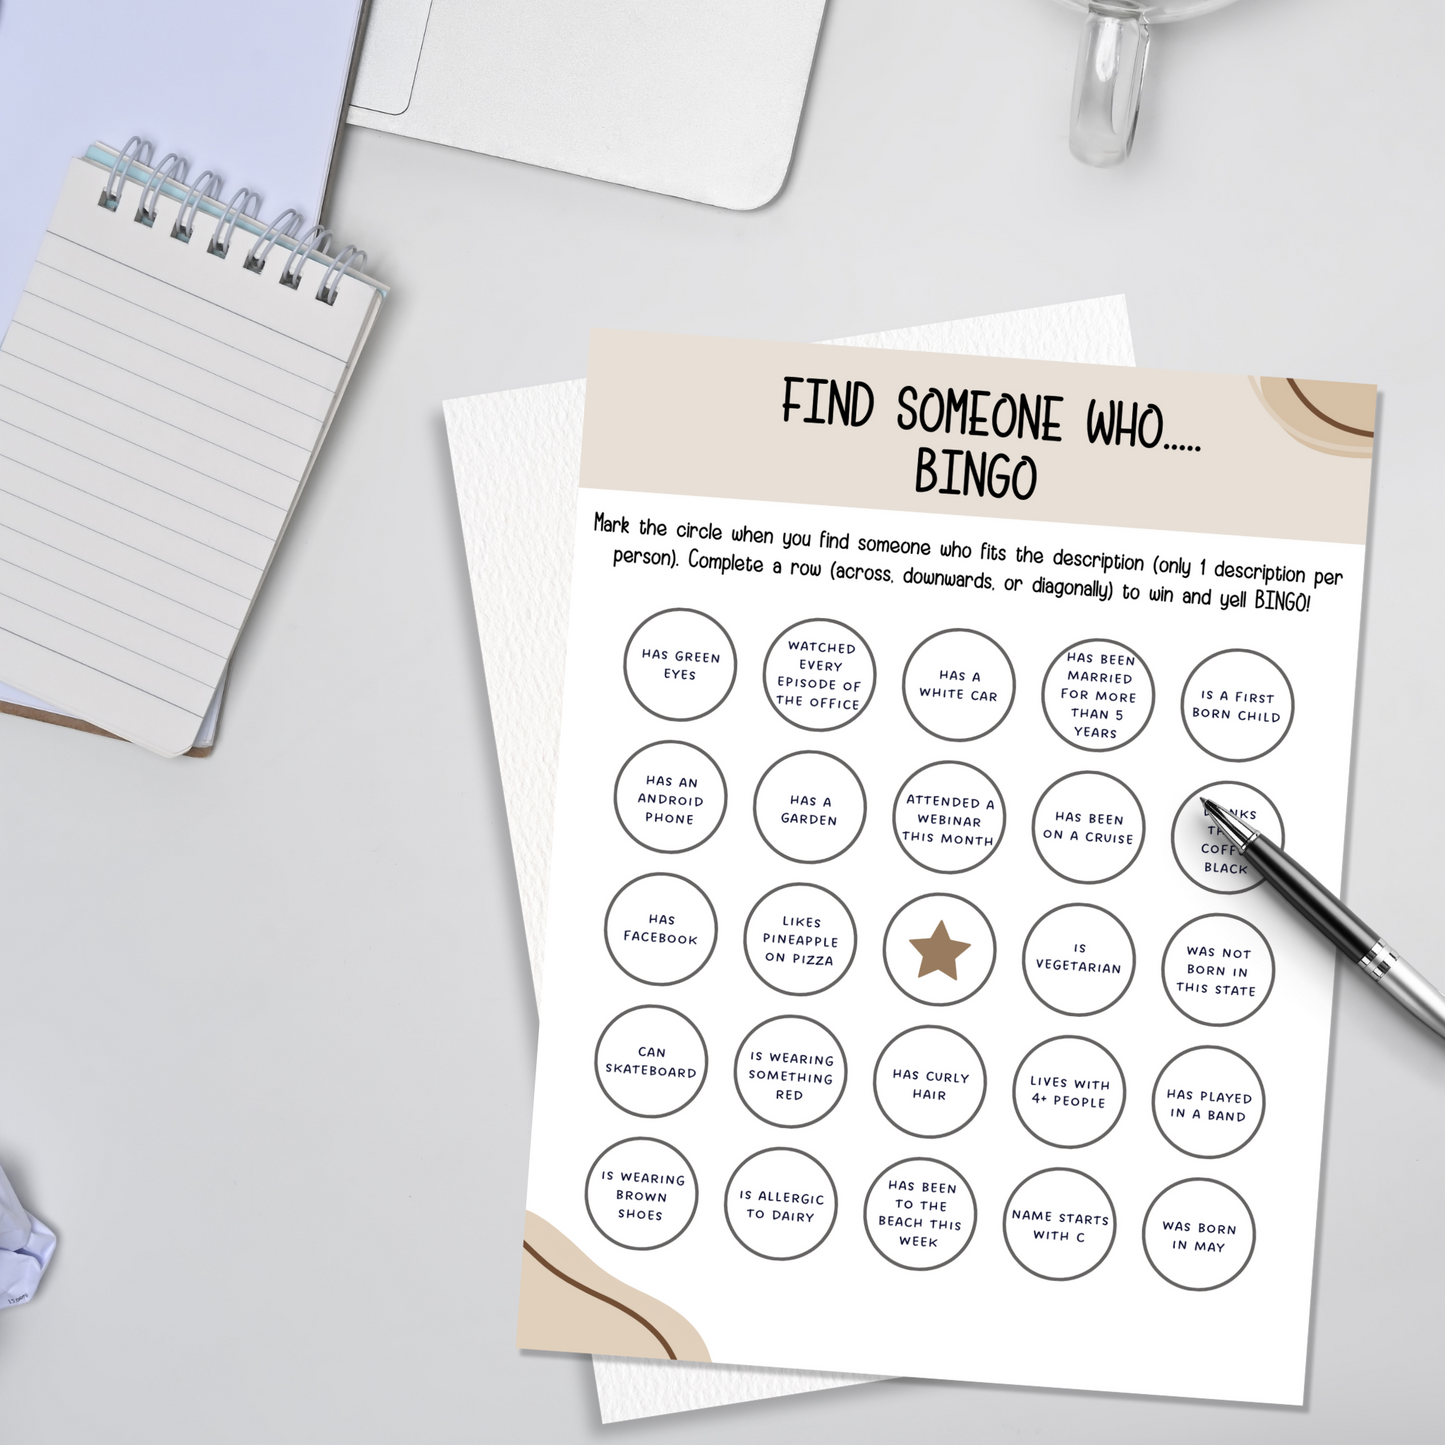 Employee Bingo, Find Someone Who Game, Fun Icebreaker Office Party Game